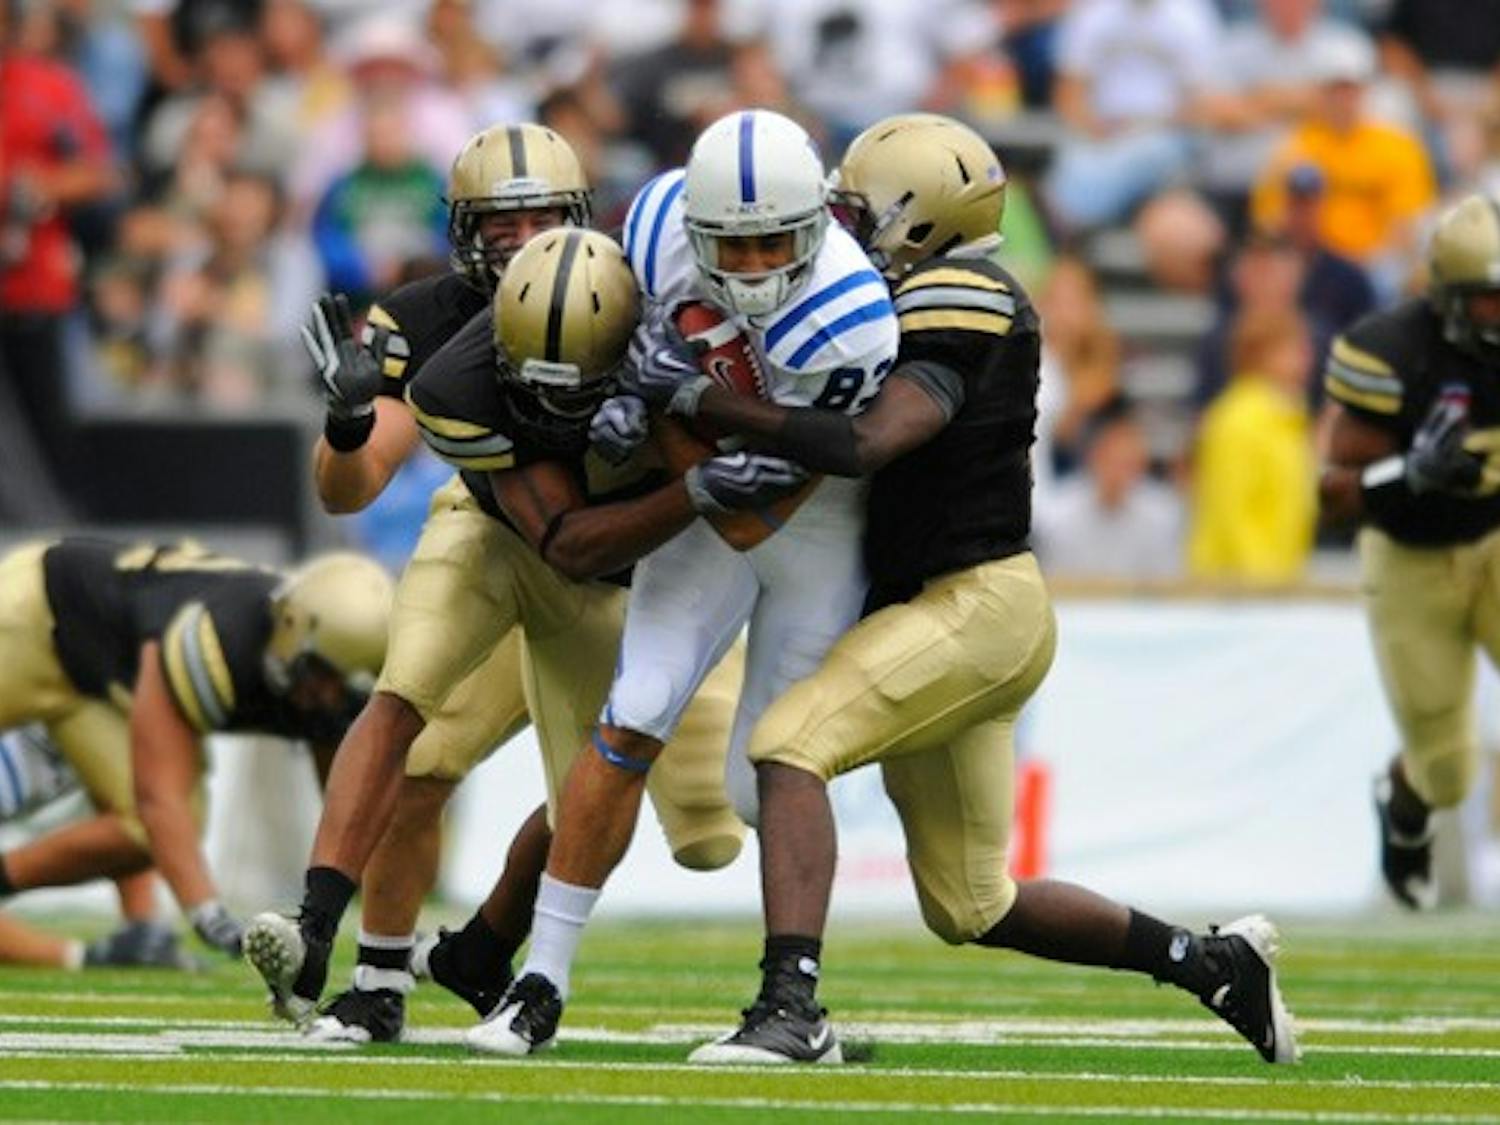 Last year, Duke beat Army 35-19 in West Point. Saturday at 3 p.m. in Wallace Wade, the Blue Devils will try to take down the Golden Knights again.